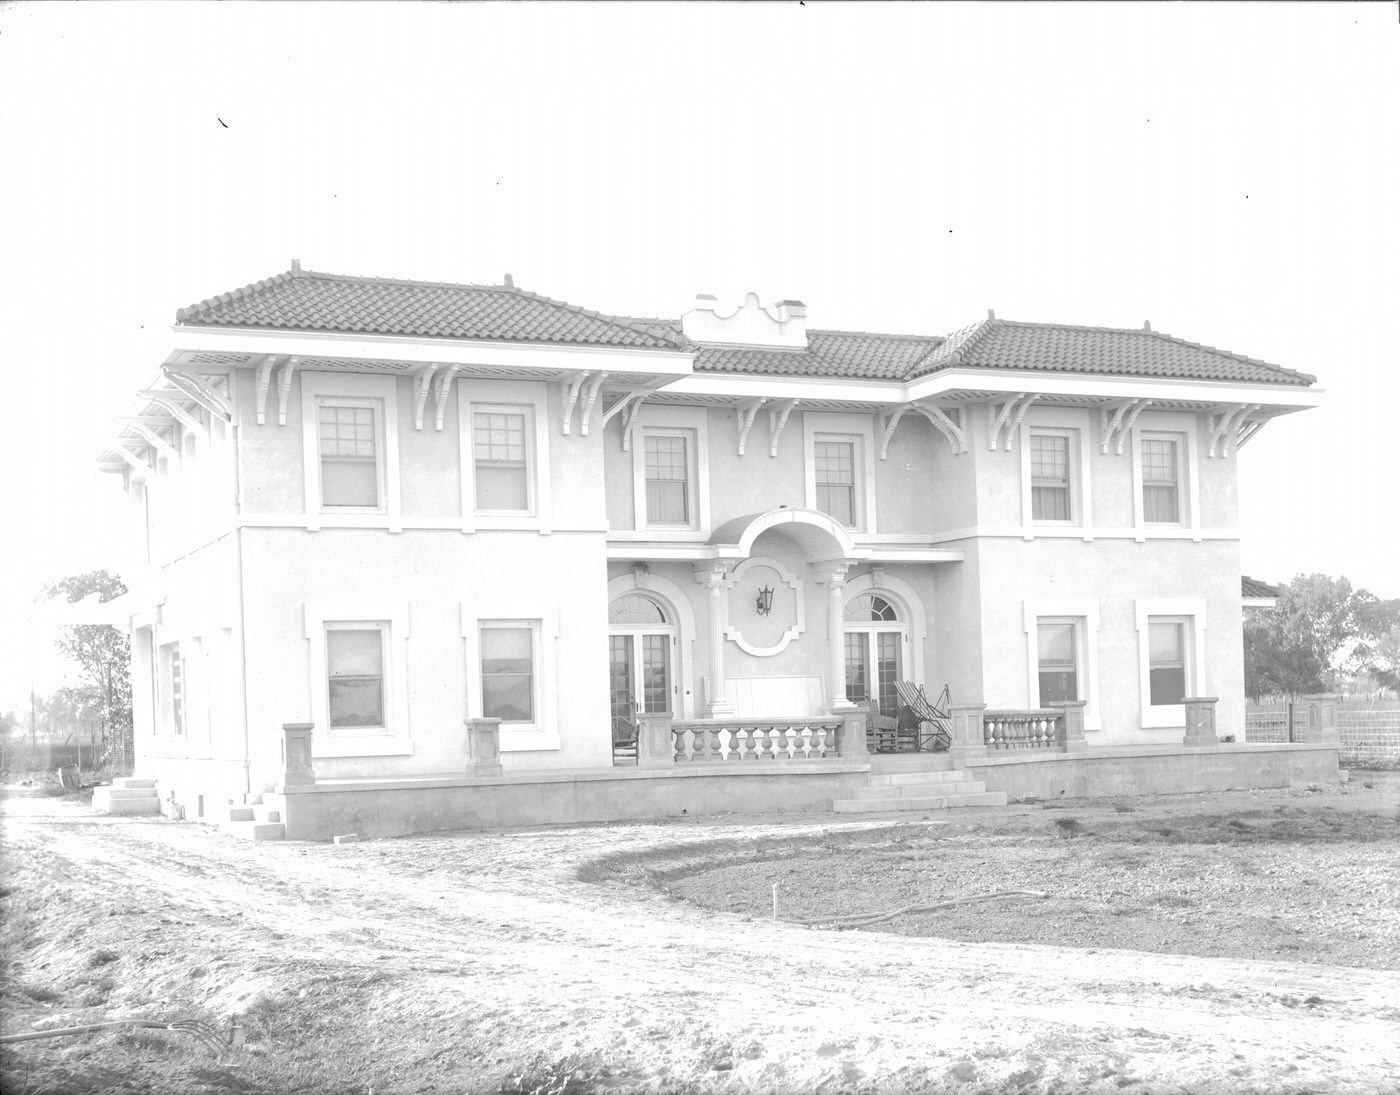 Norton House, 1920. This house was built in 1912 and is located at 2700 N.15th Ave. in Phoenix.